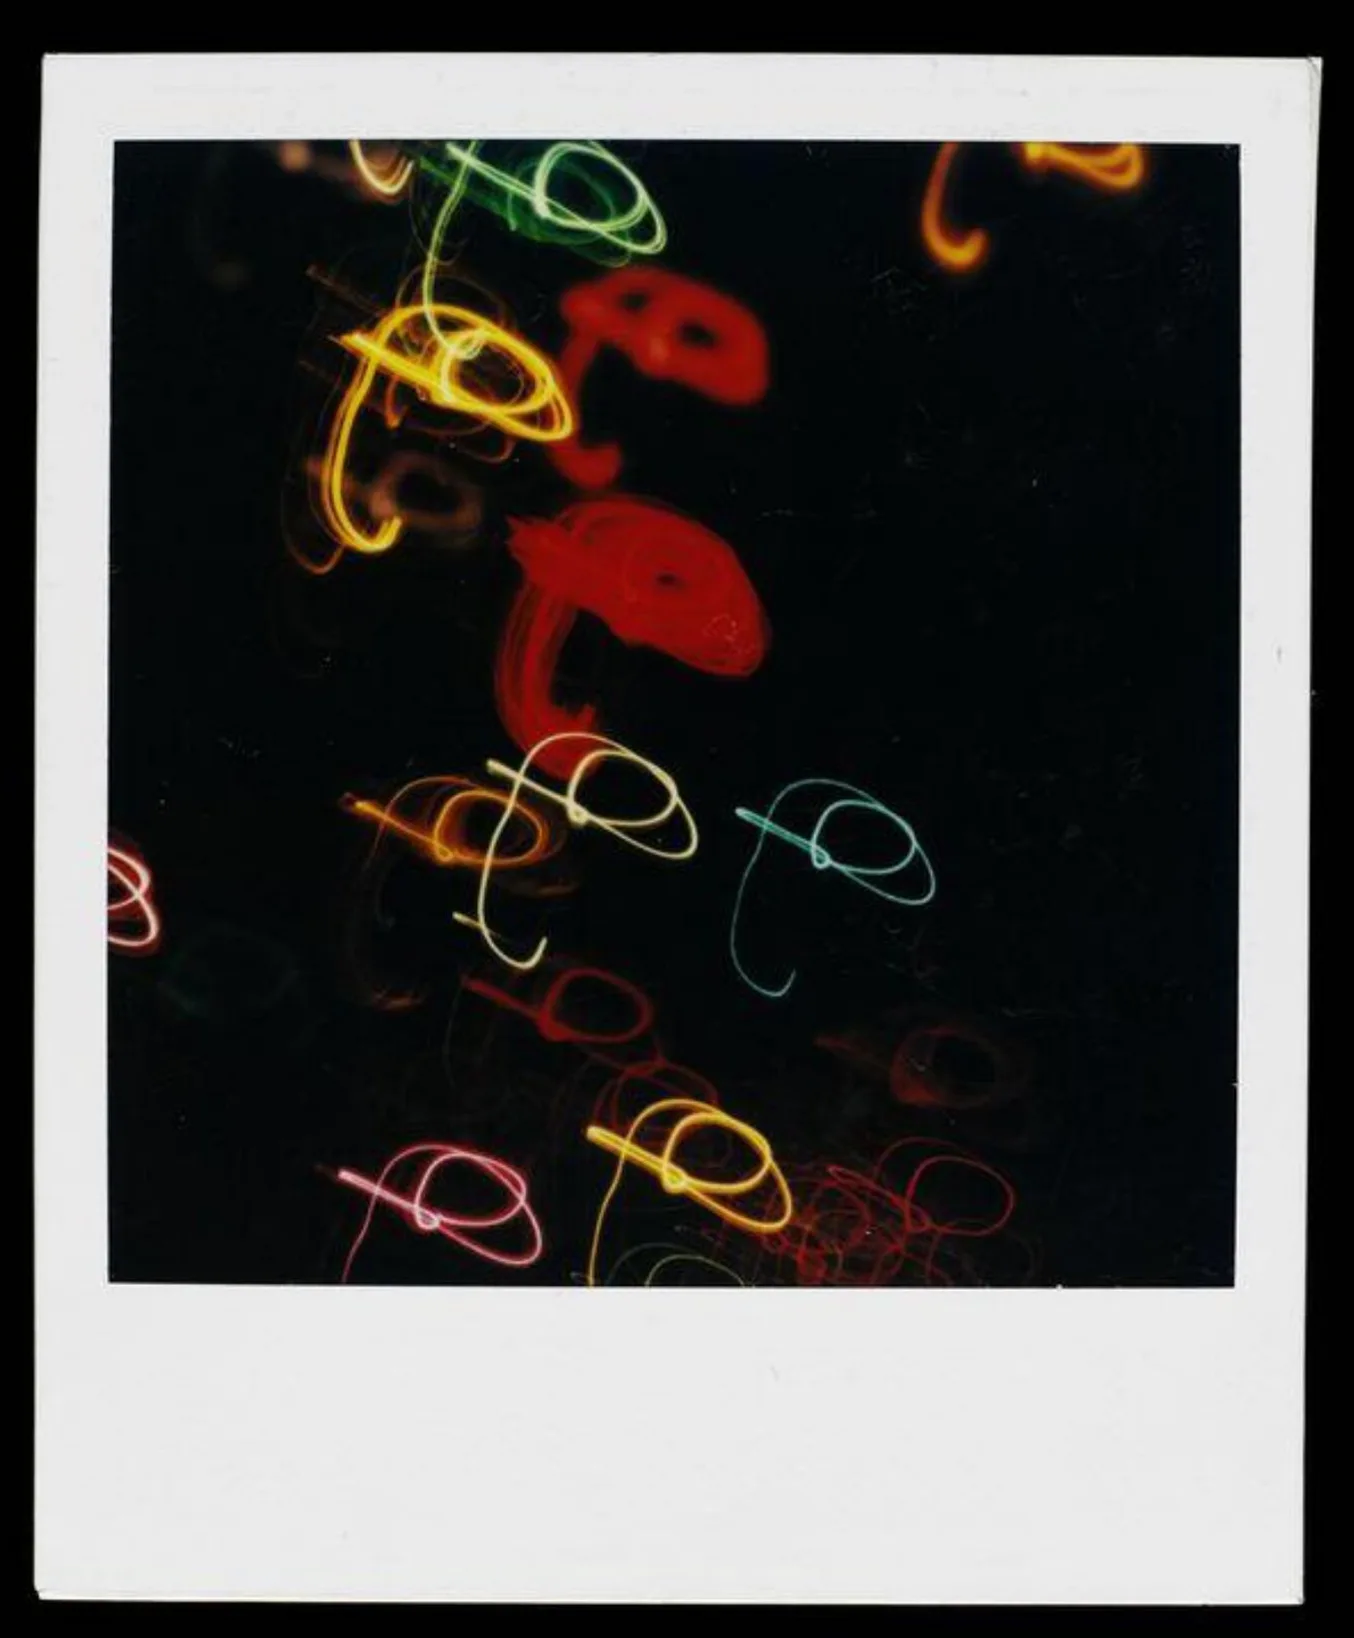 Polaroid photo showing abstract colorful shapes